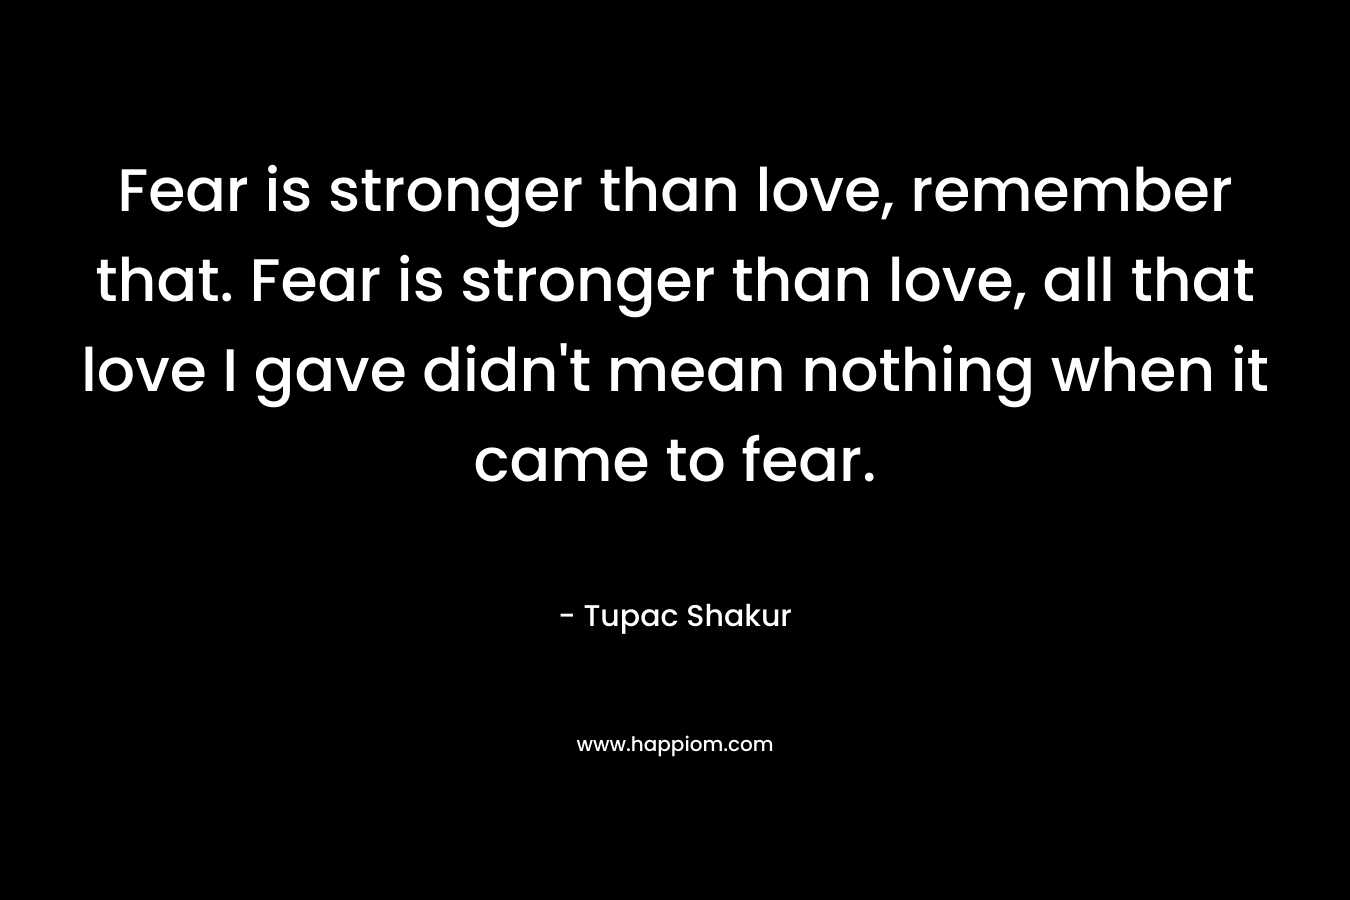 Fear is stronger than love, remember that. Fear is stronger than love, all that love I gave didn’t mean nothing when it came to fear. – Tupac Shakur